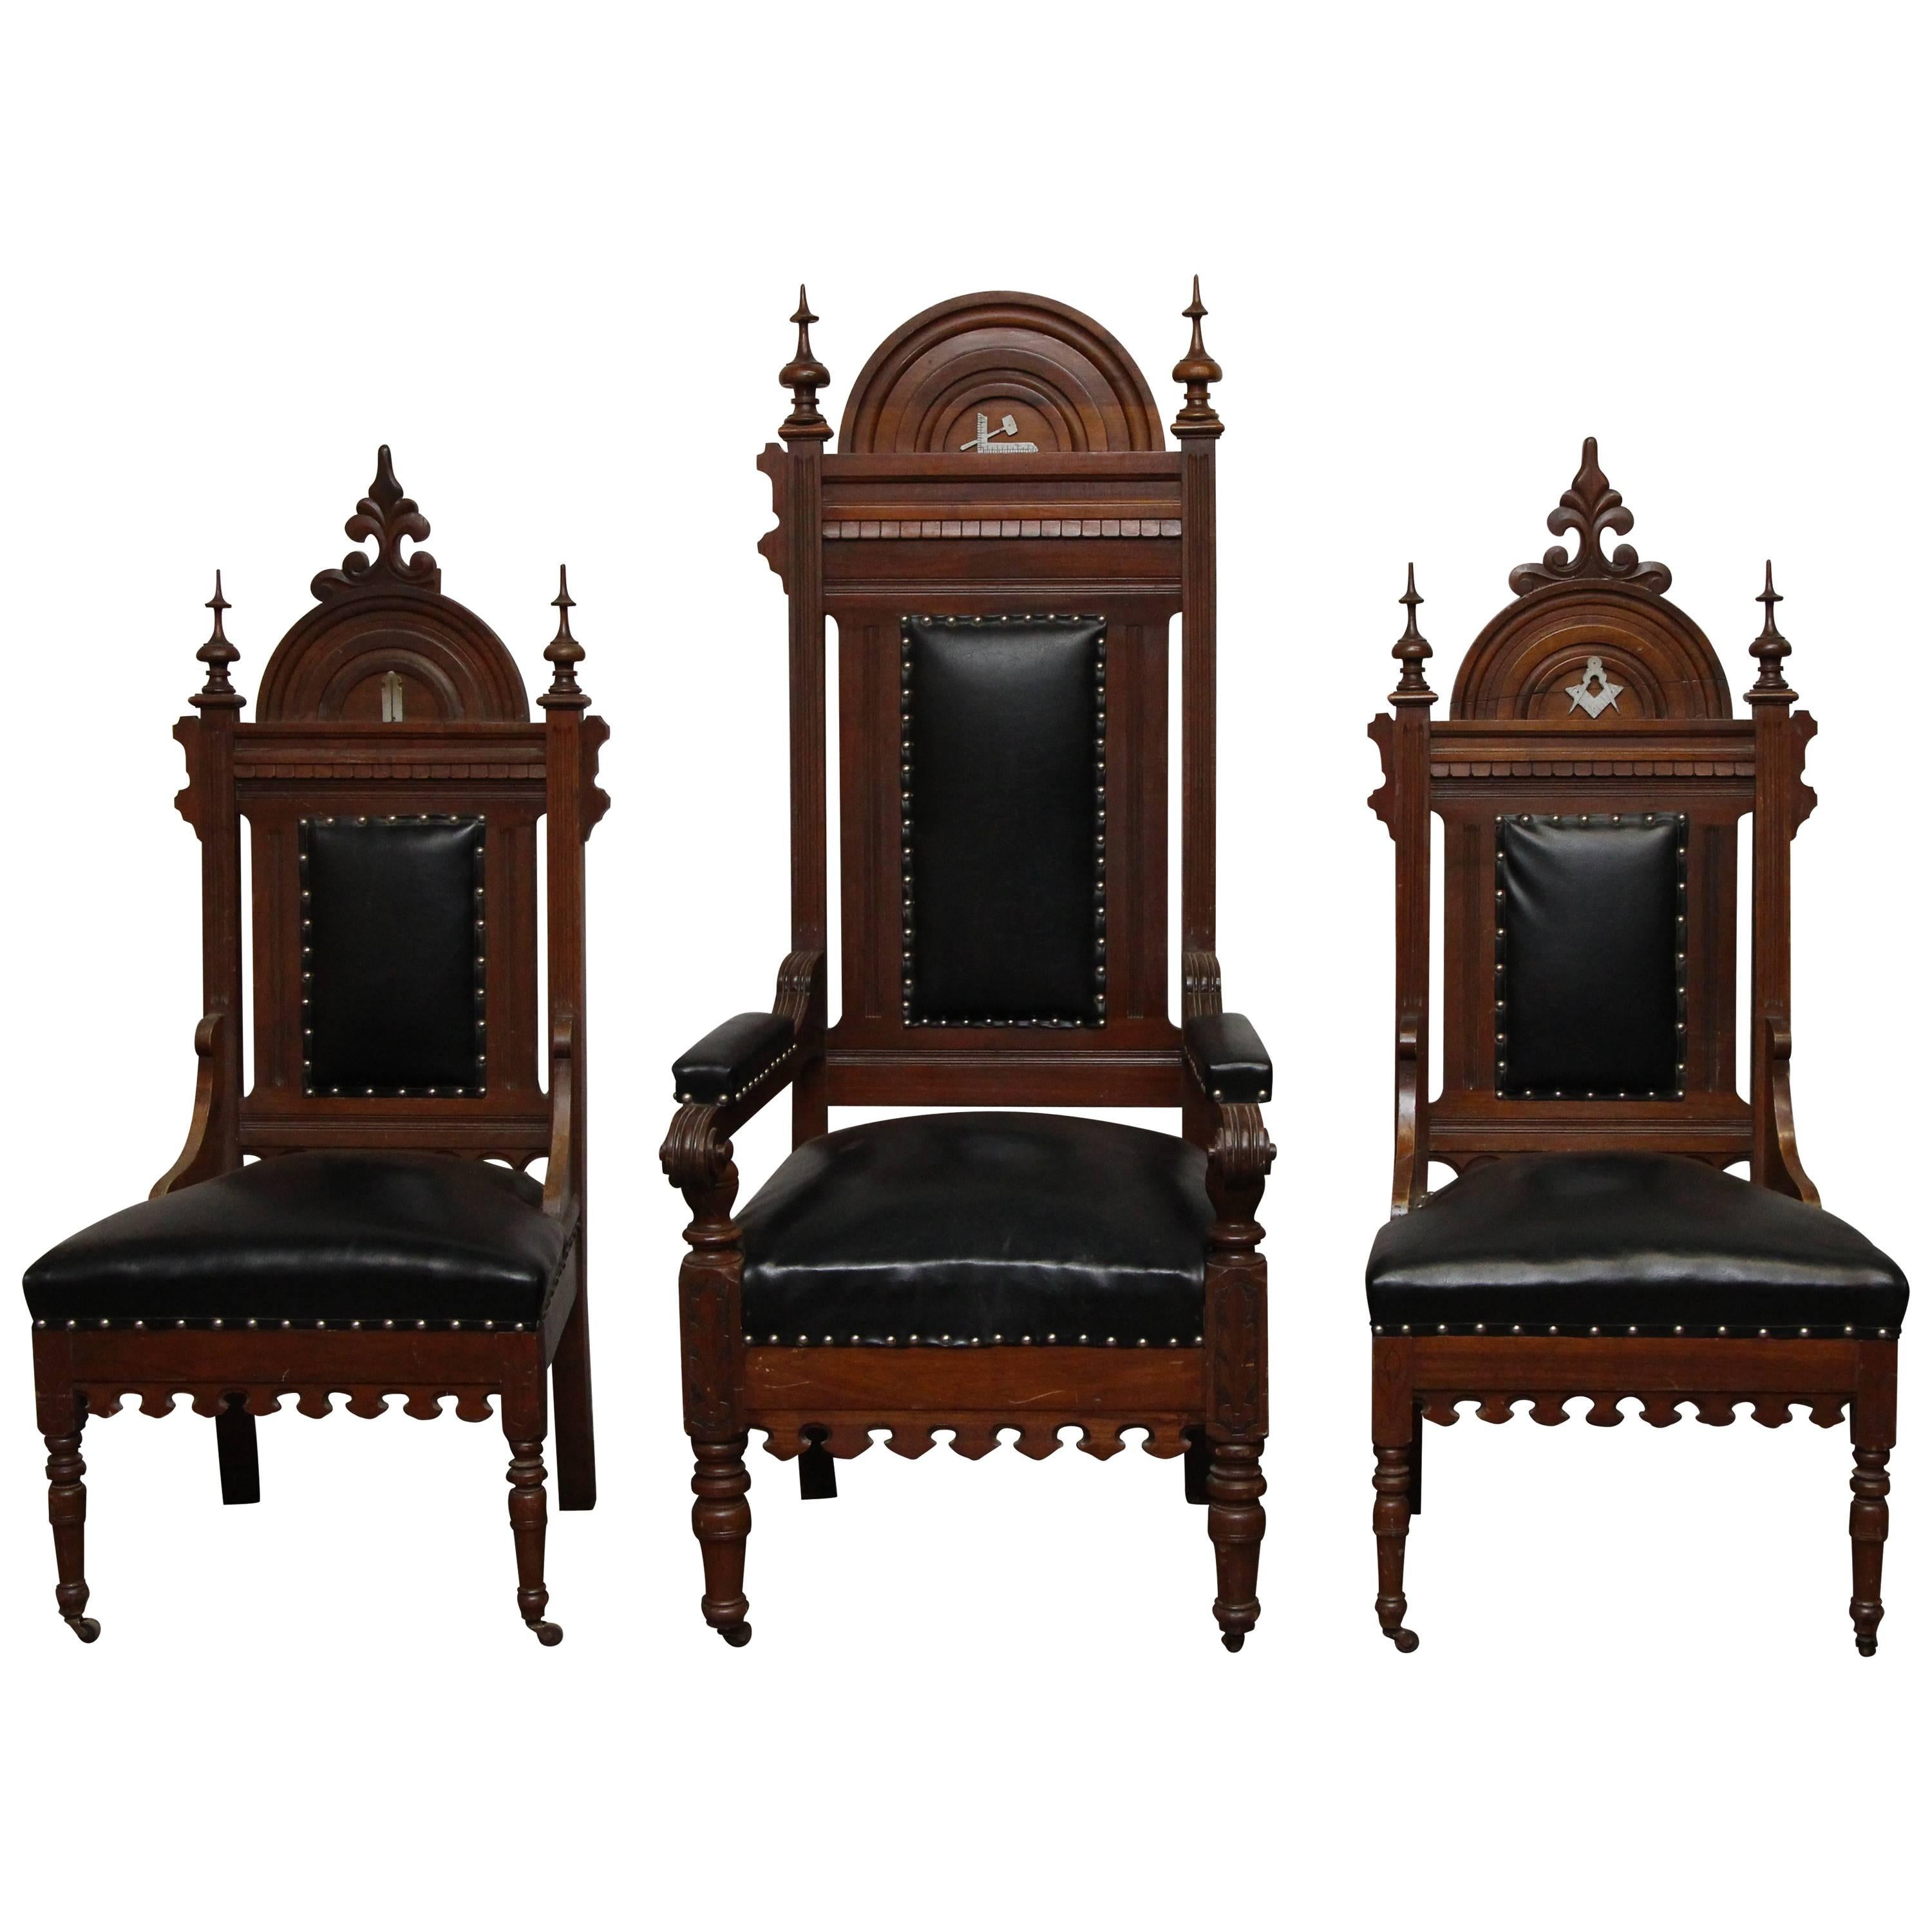 Set of Three Ornate Black Leather and Wood Masonic Chairs and Studded Details